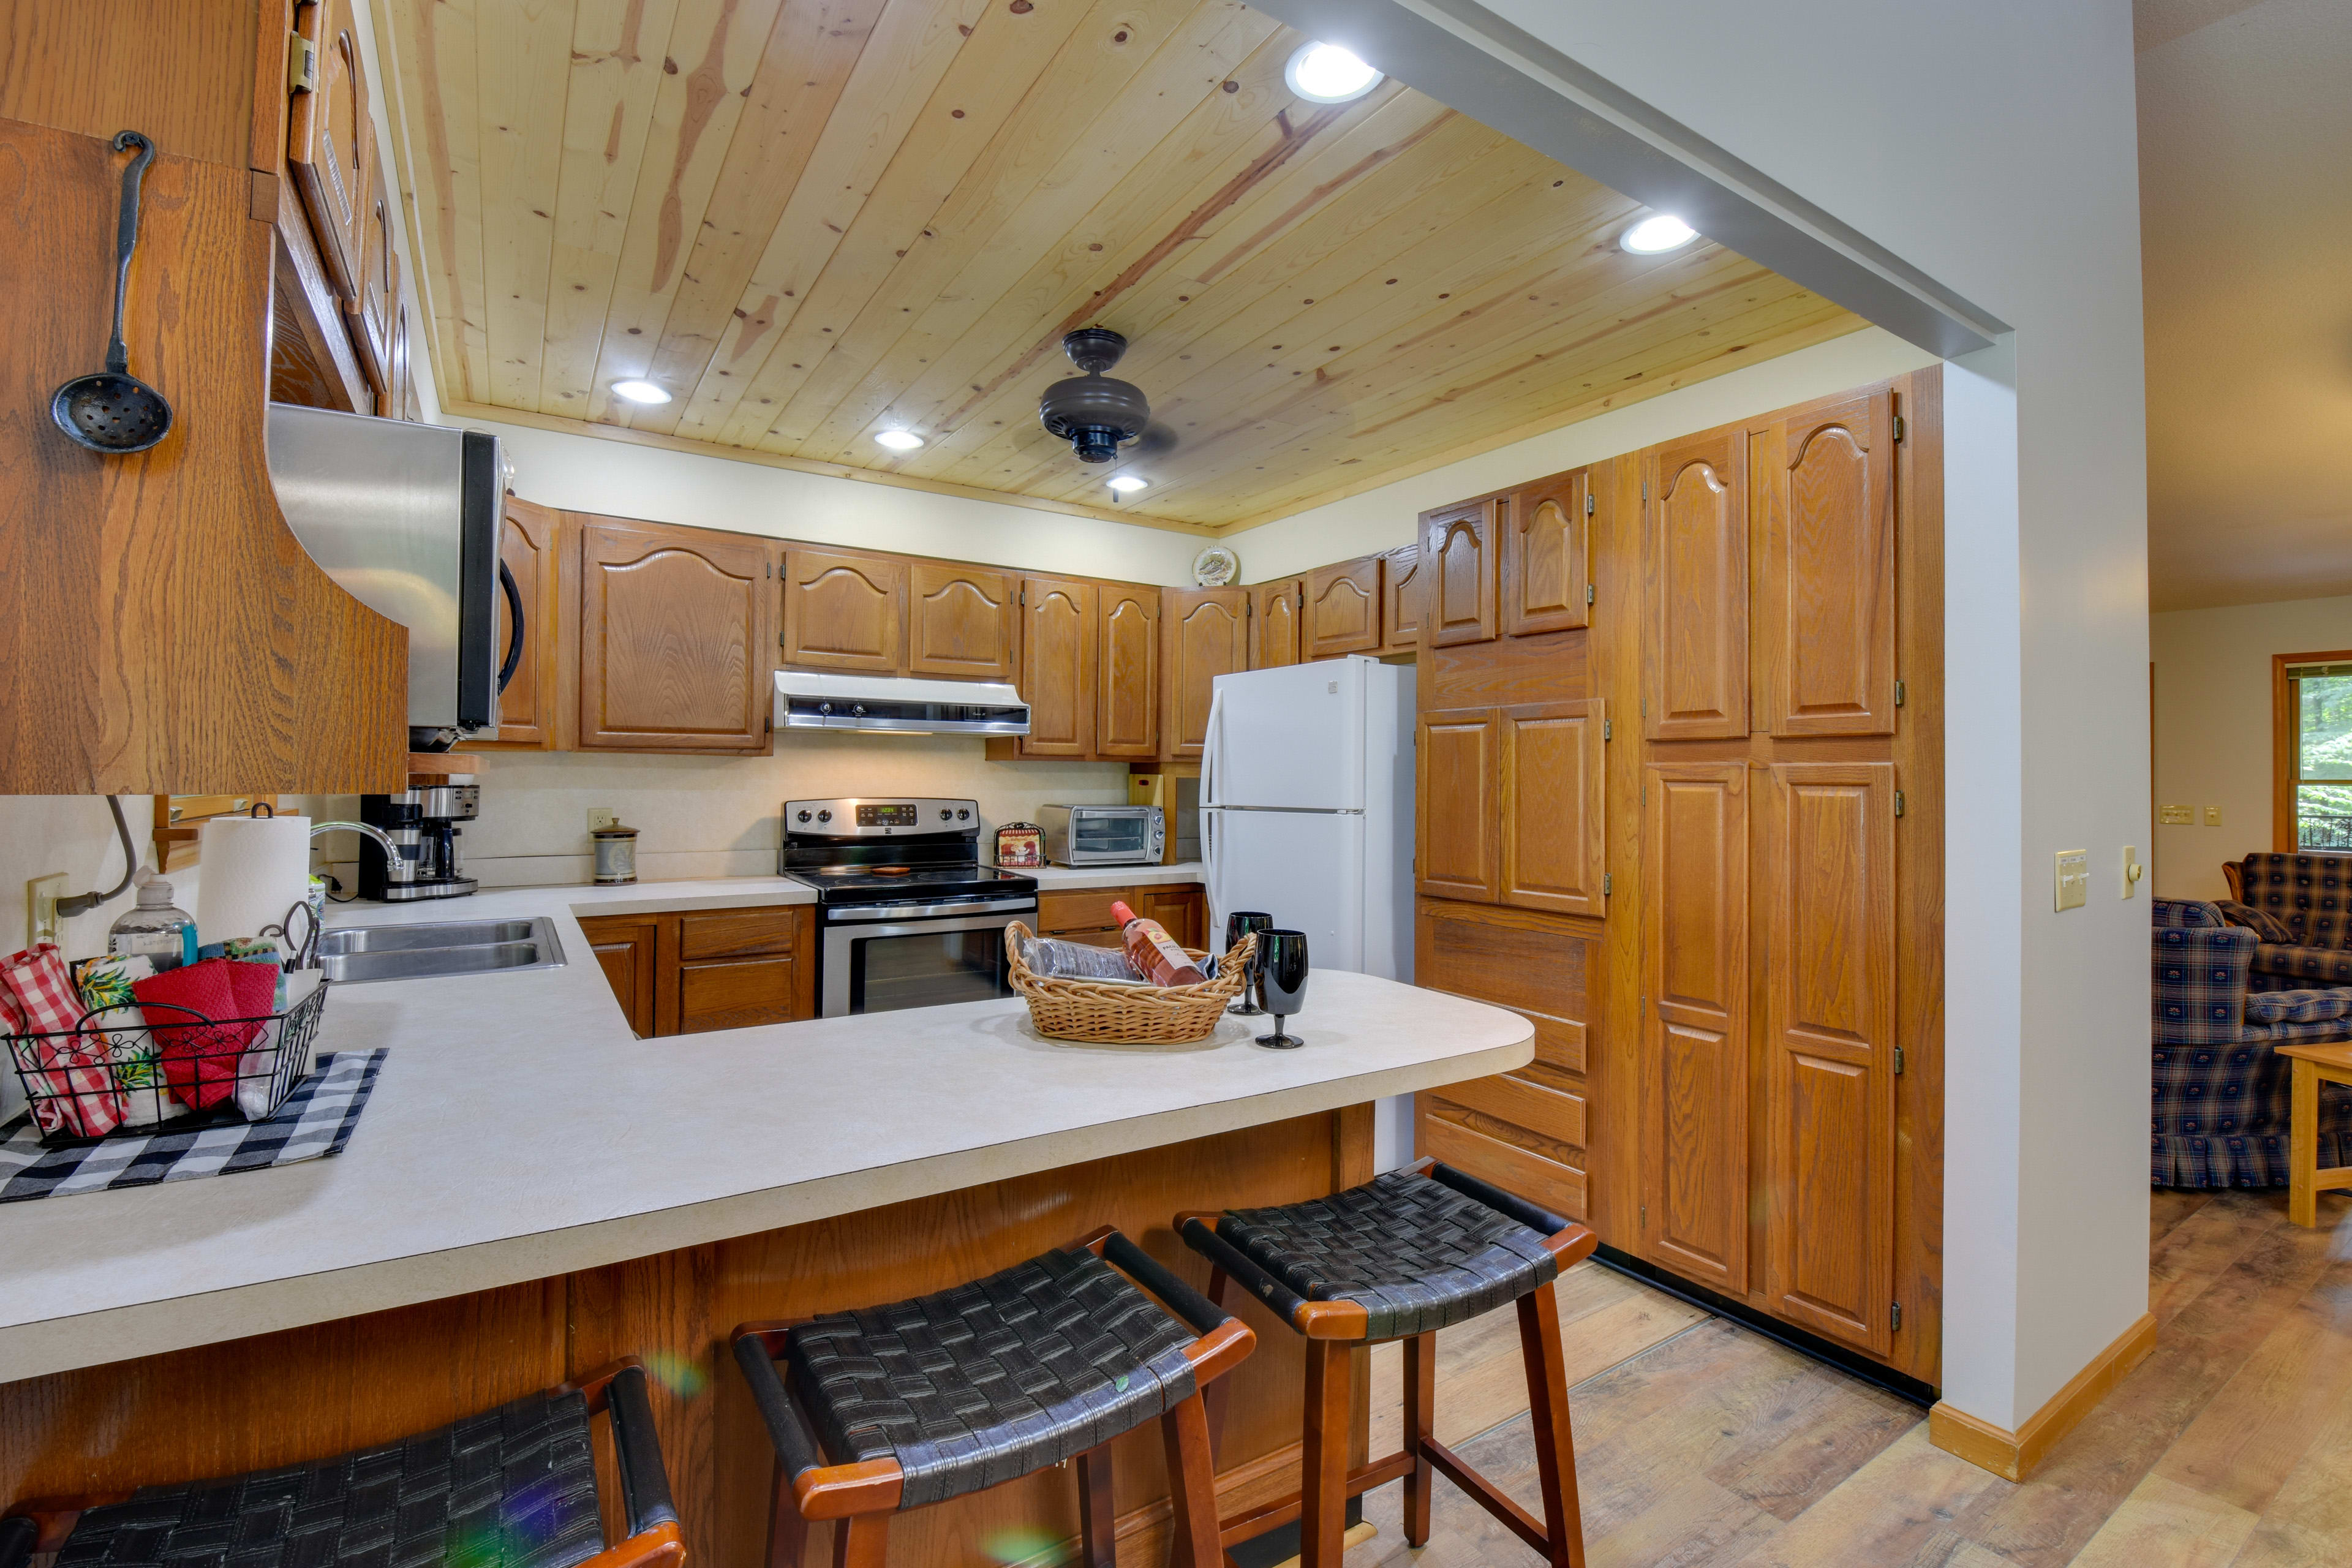 Kitchen | Fully Equipped | Cooking Basics | Spices | Breakfast Bar